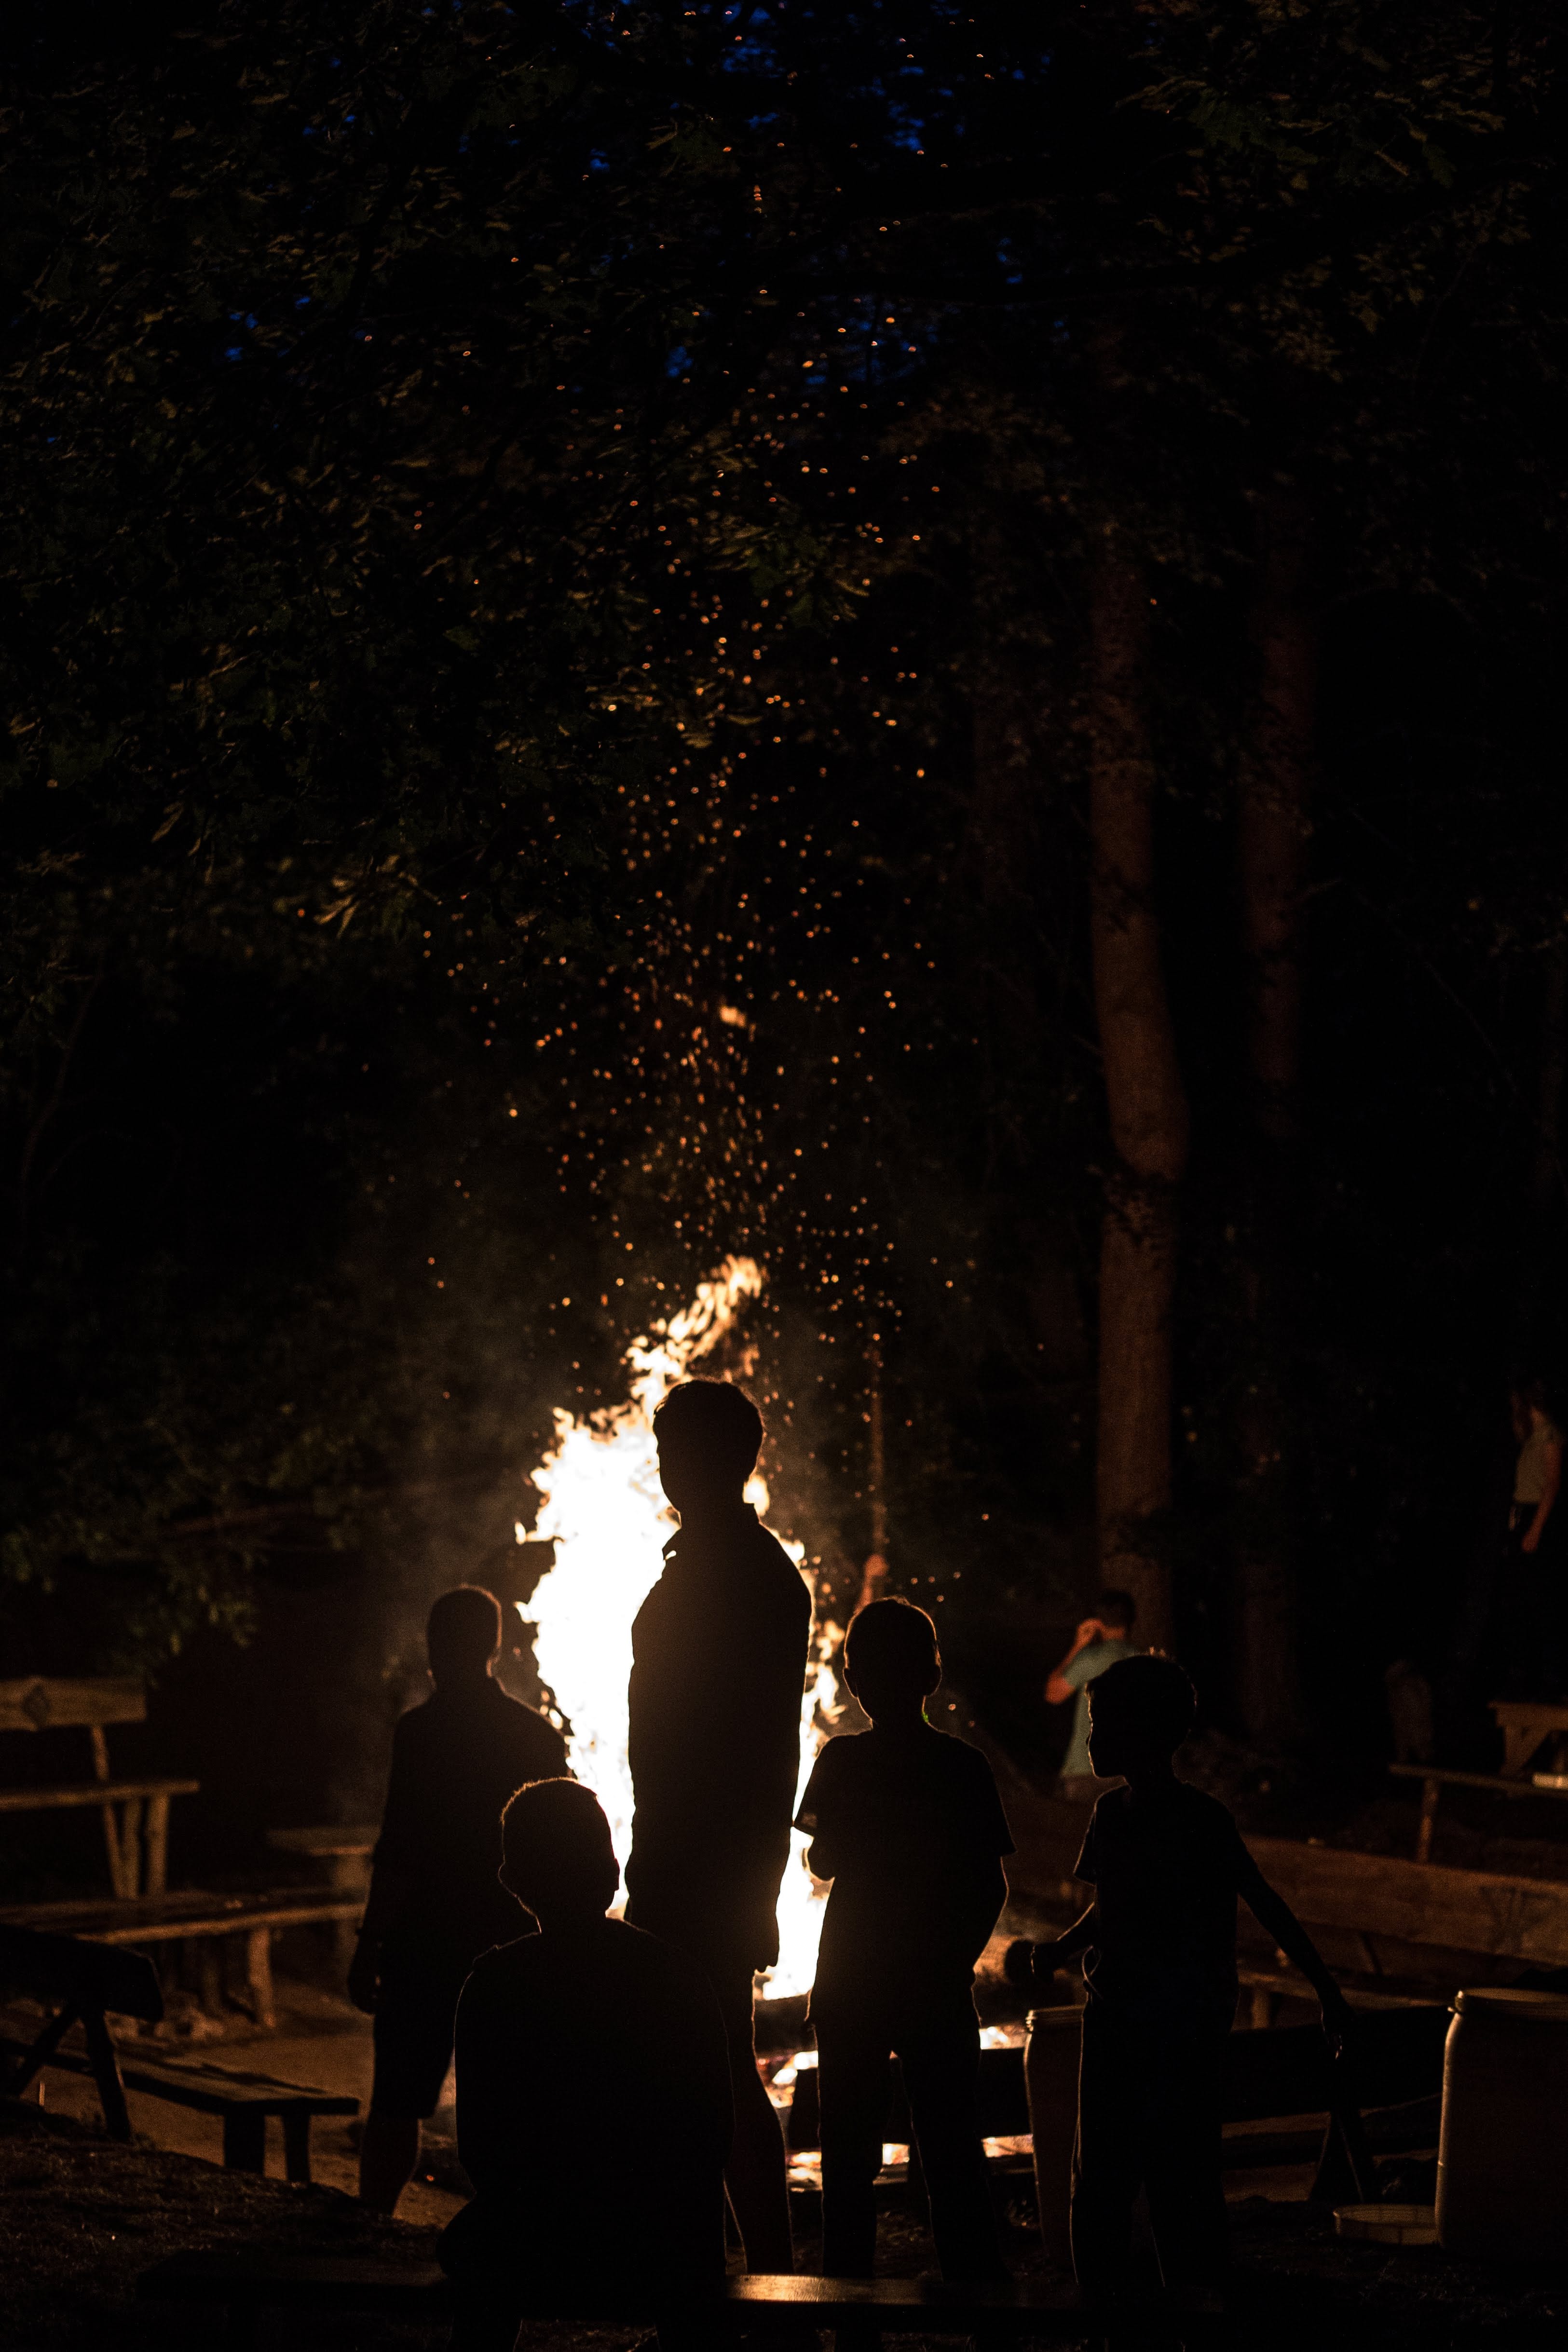 campfire with silhouettes